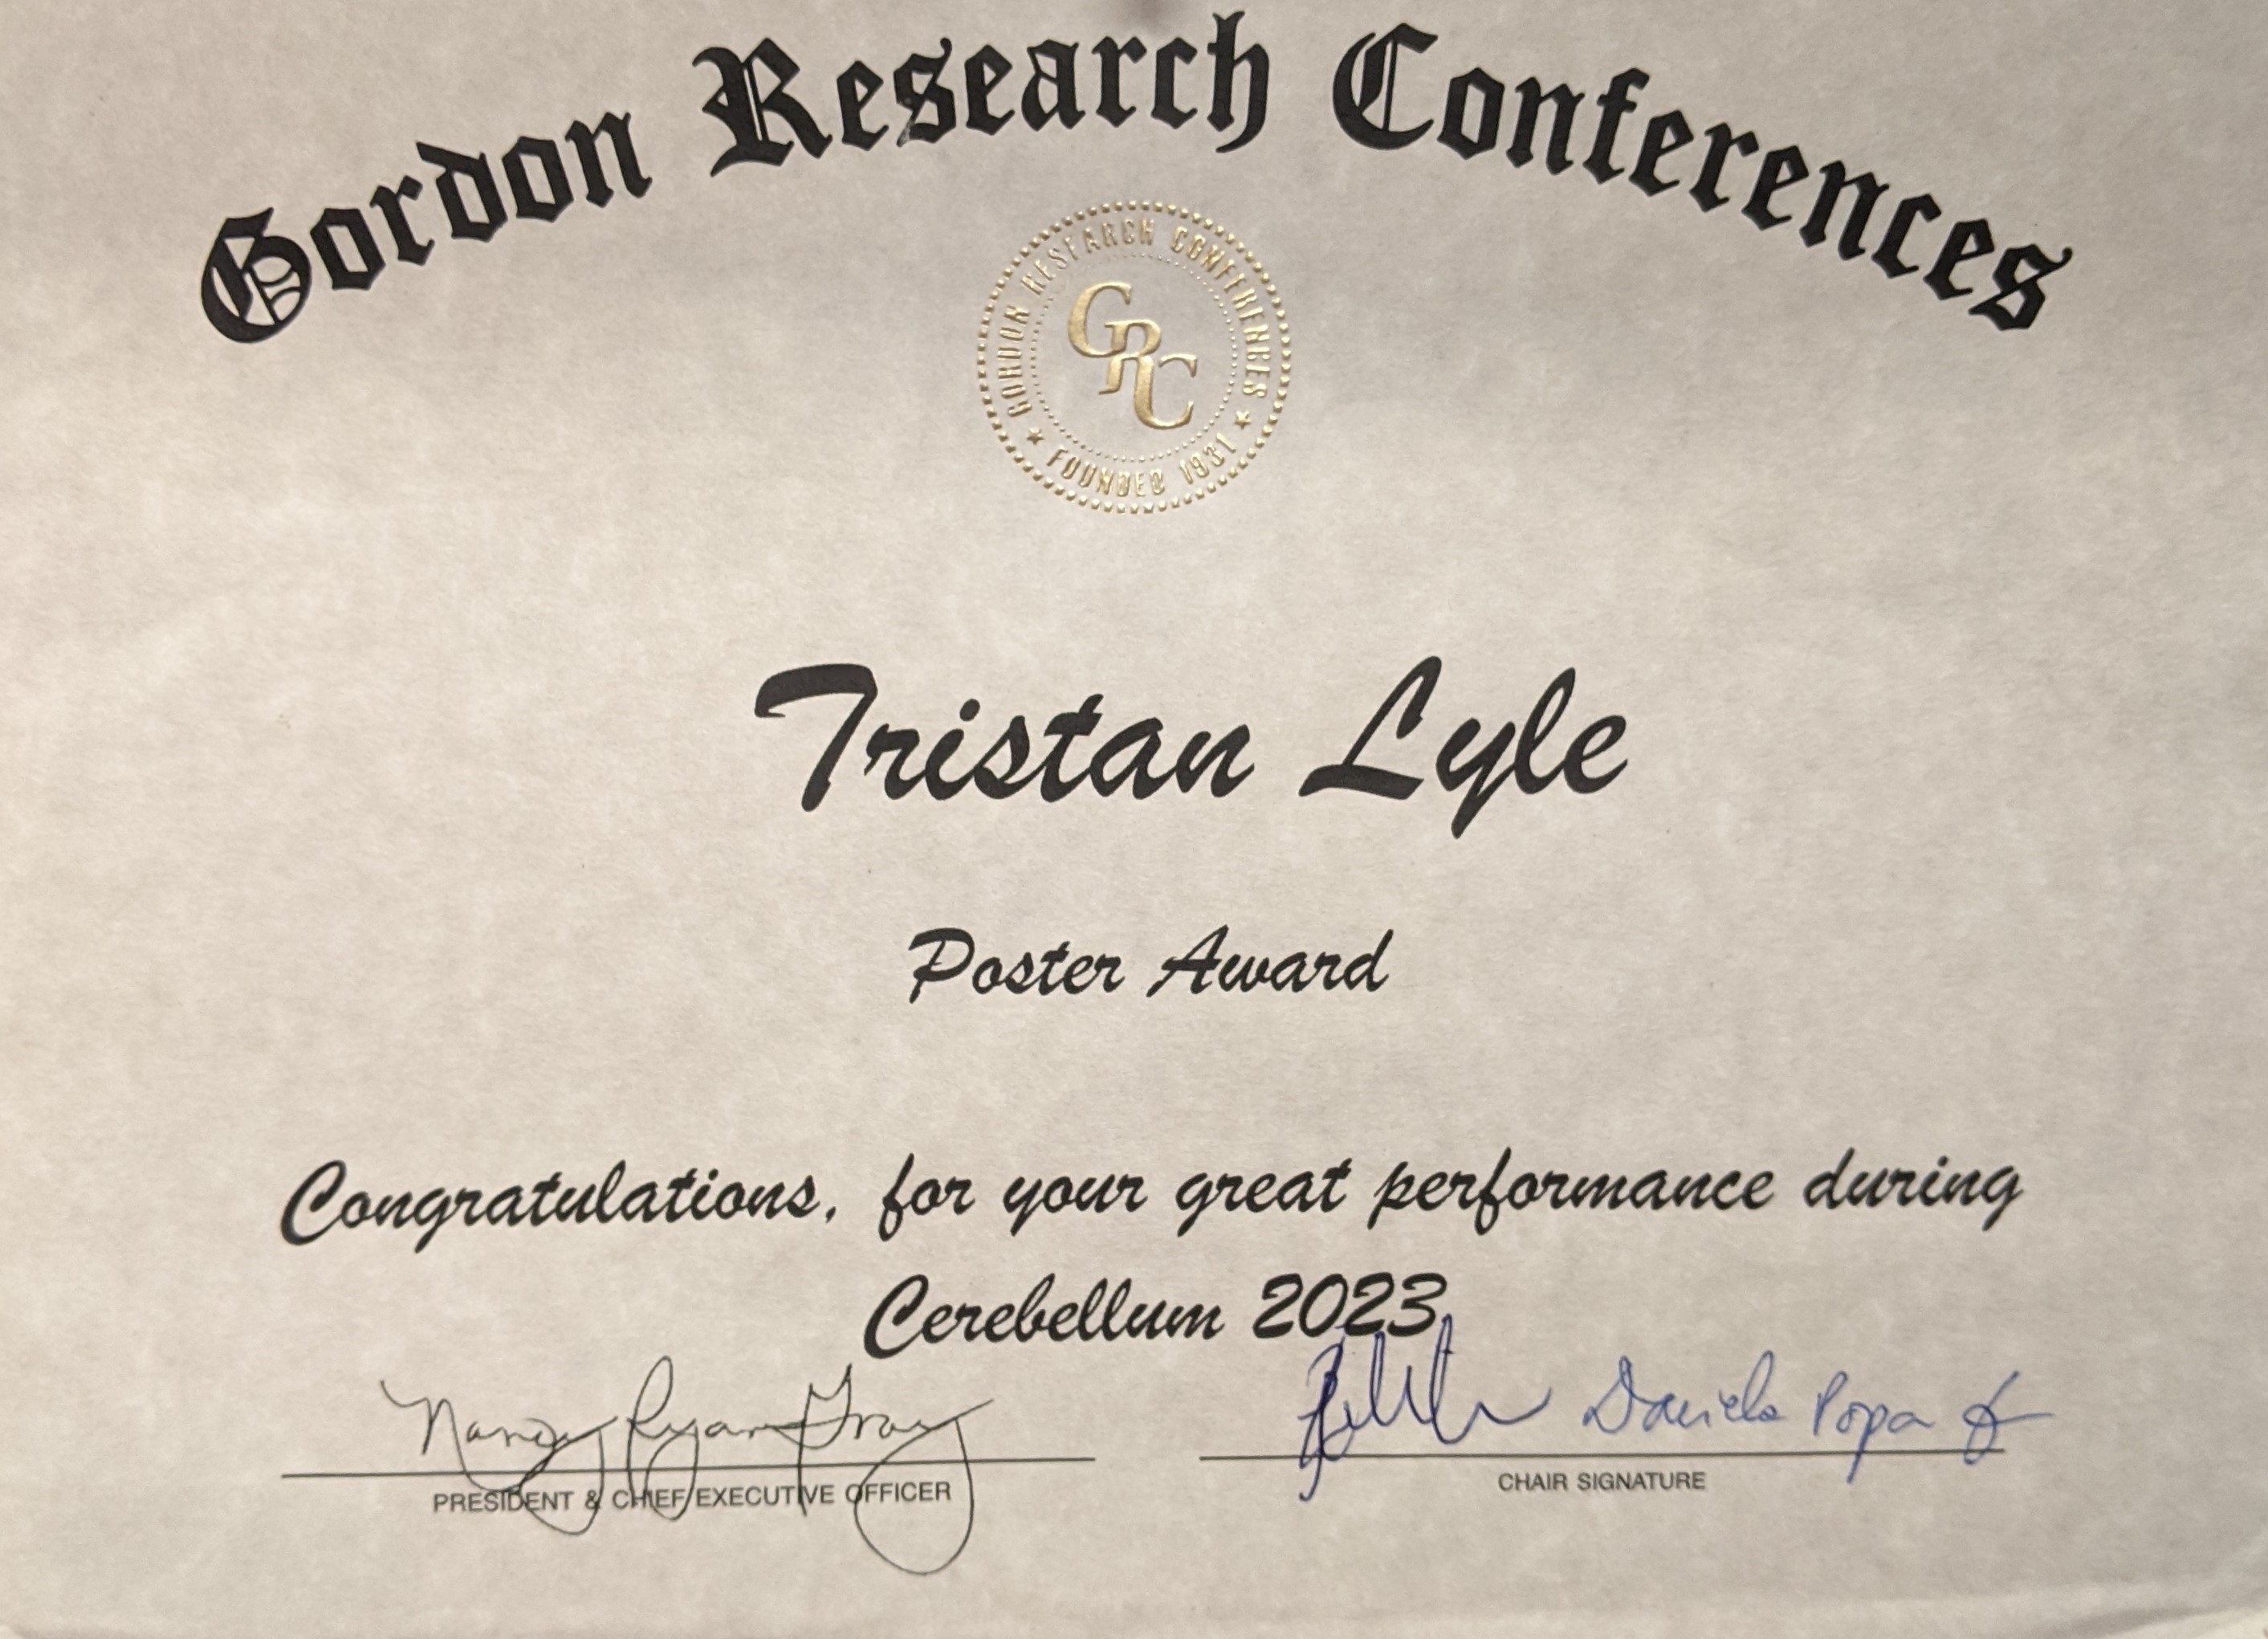 A poster award certificate presented to Tristan Lyle from the Gordon Research Conferences.